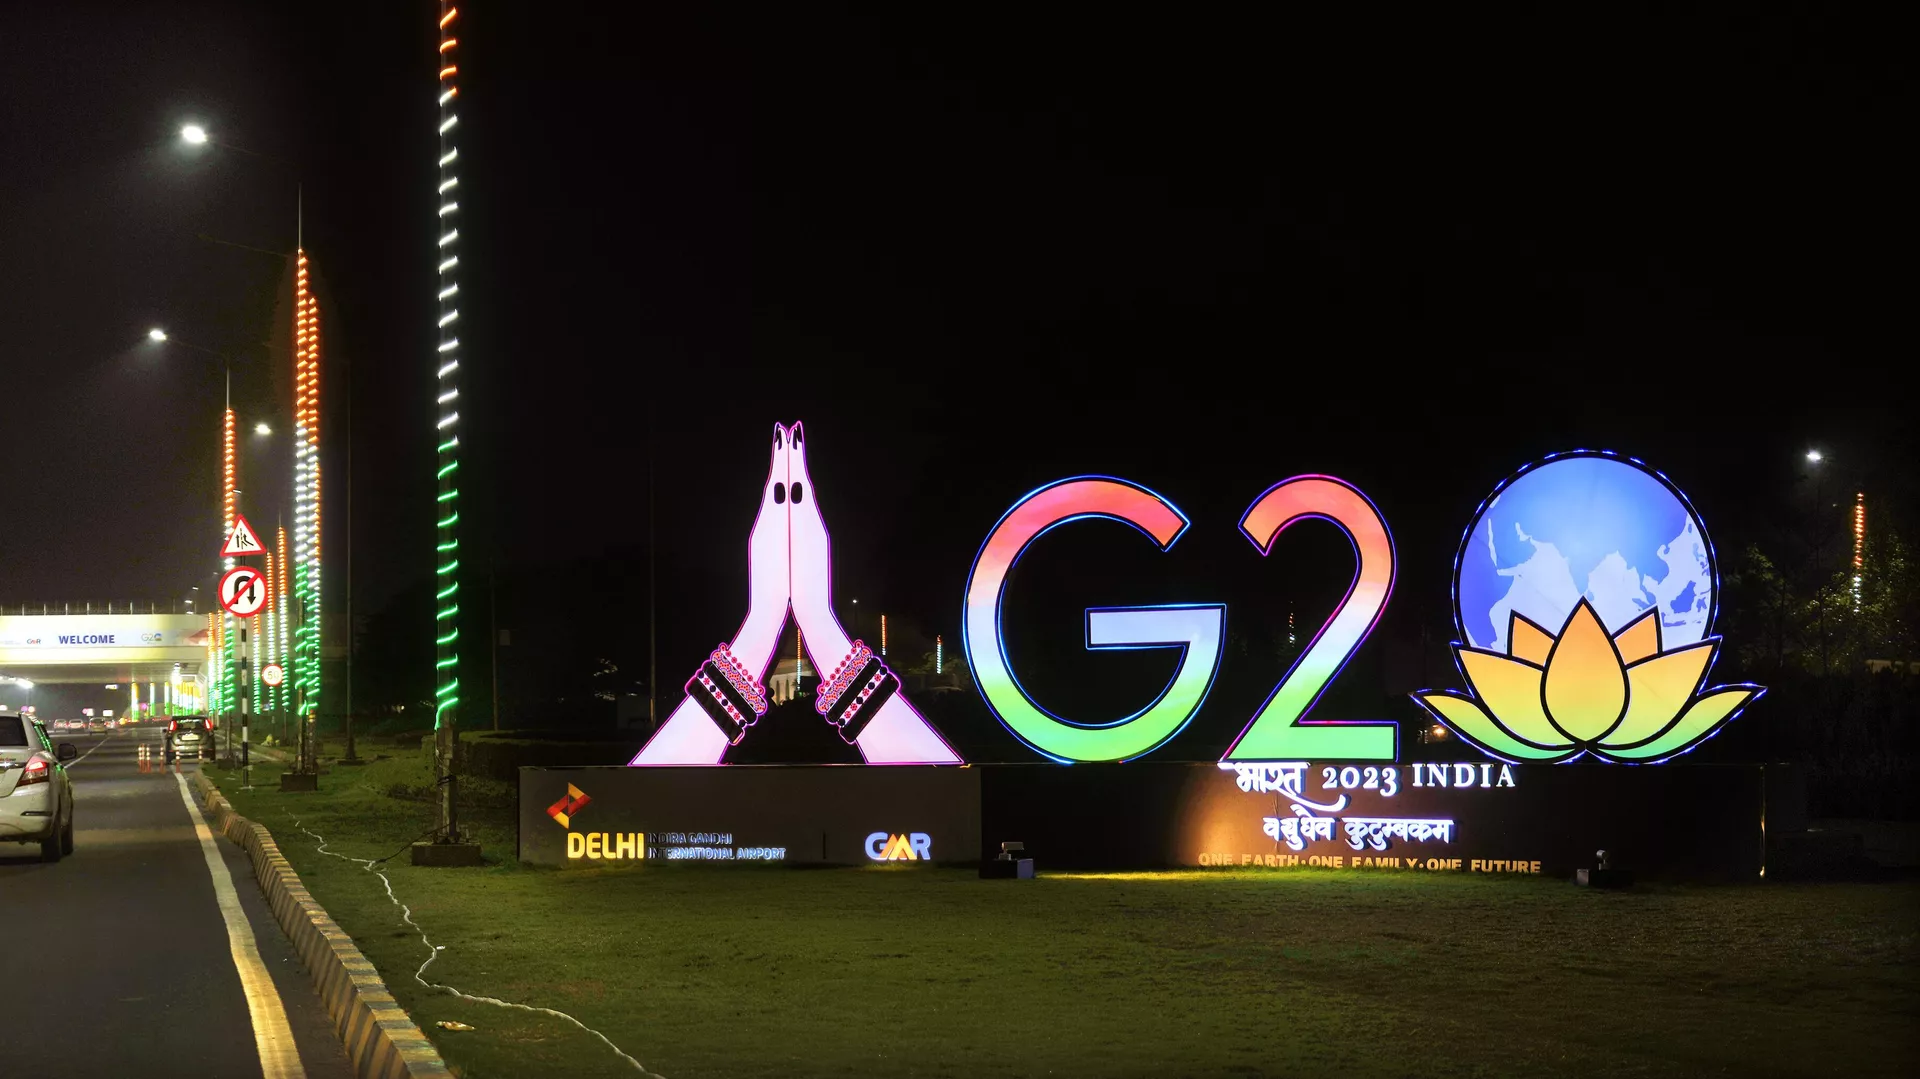 Traffics moves past an illuminated G20 logo near the airport ahead of this week’s summit of the Group of 20 nations in New Delhi, India, Wednesday, Sept. 6, 2023 - Sputnik Afrique, 1920, 09.09.2023